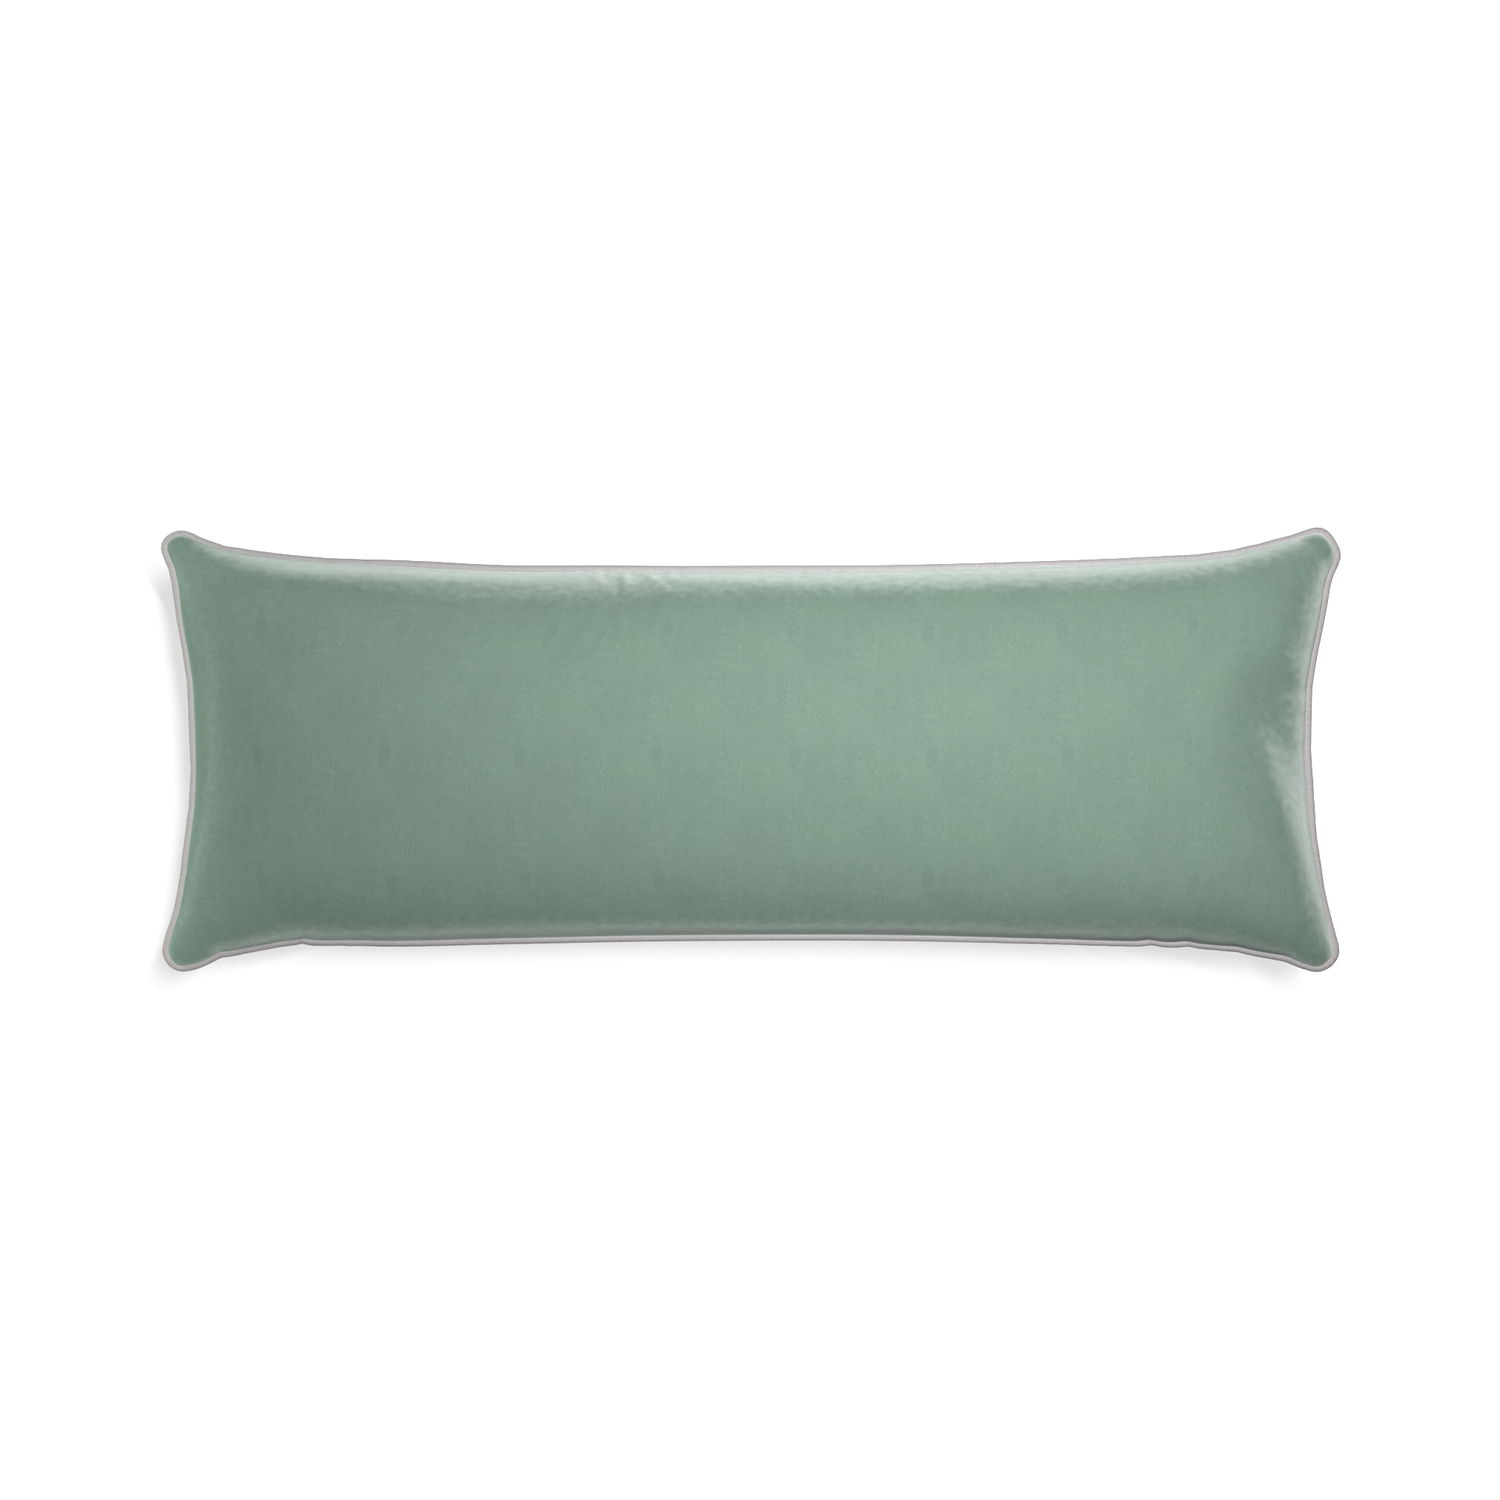 rectangle blue green velvet pillow with gray piping